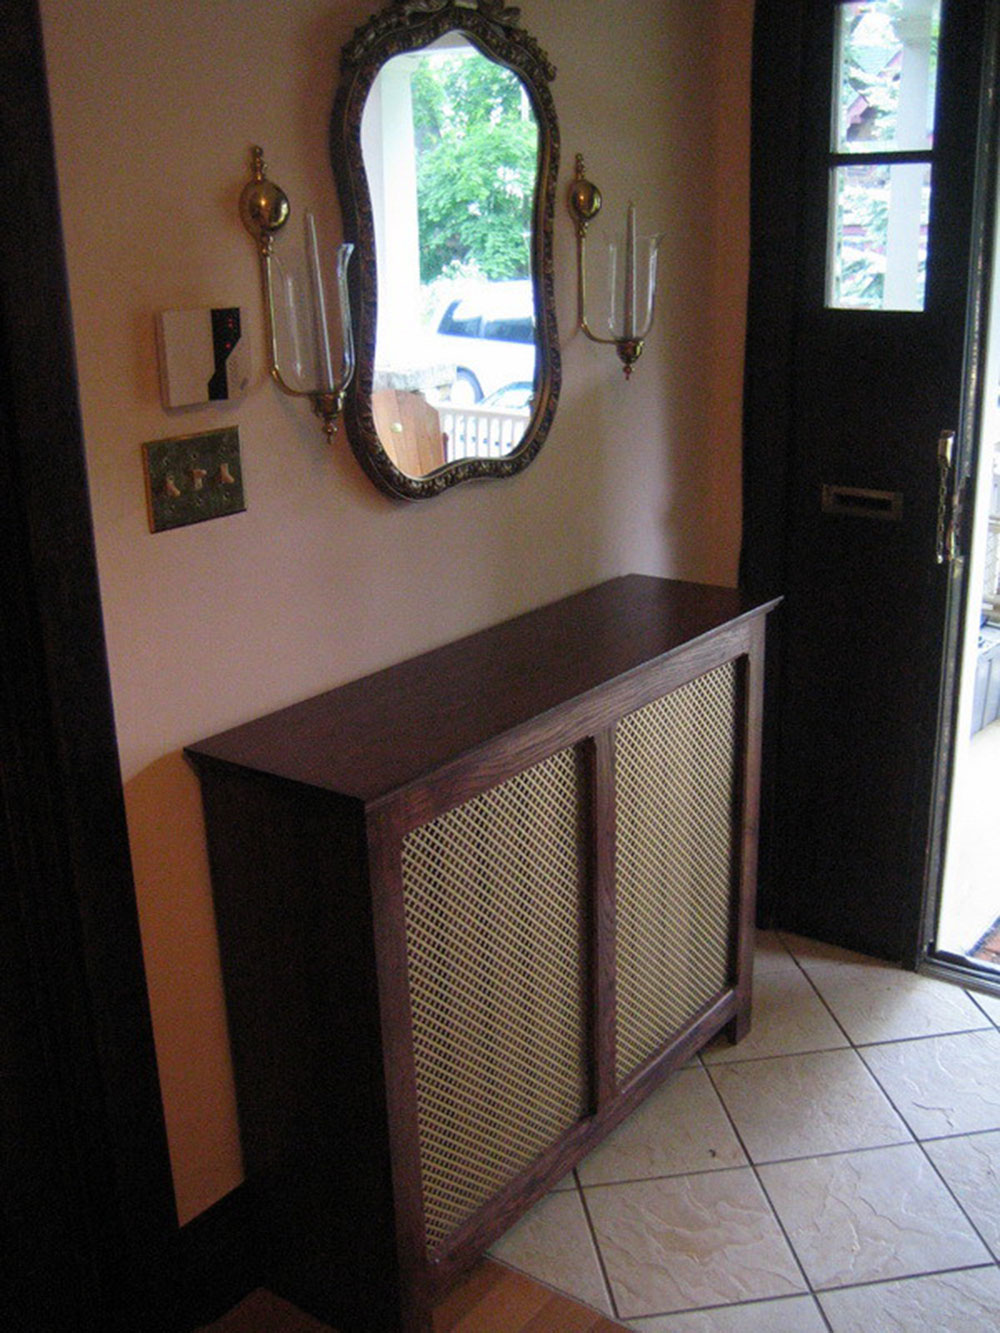 Radiator-Covers-by-Lipa-Woodwork What Radiator Covers to use to blend in with your Home Décor